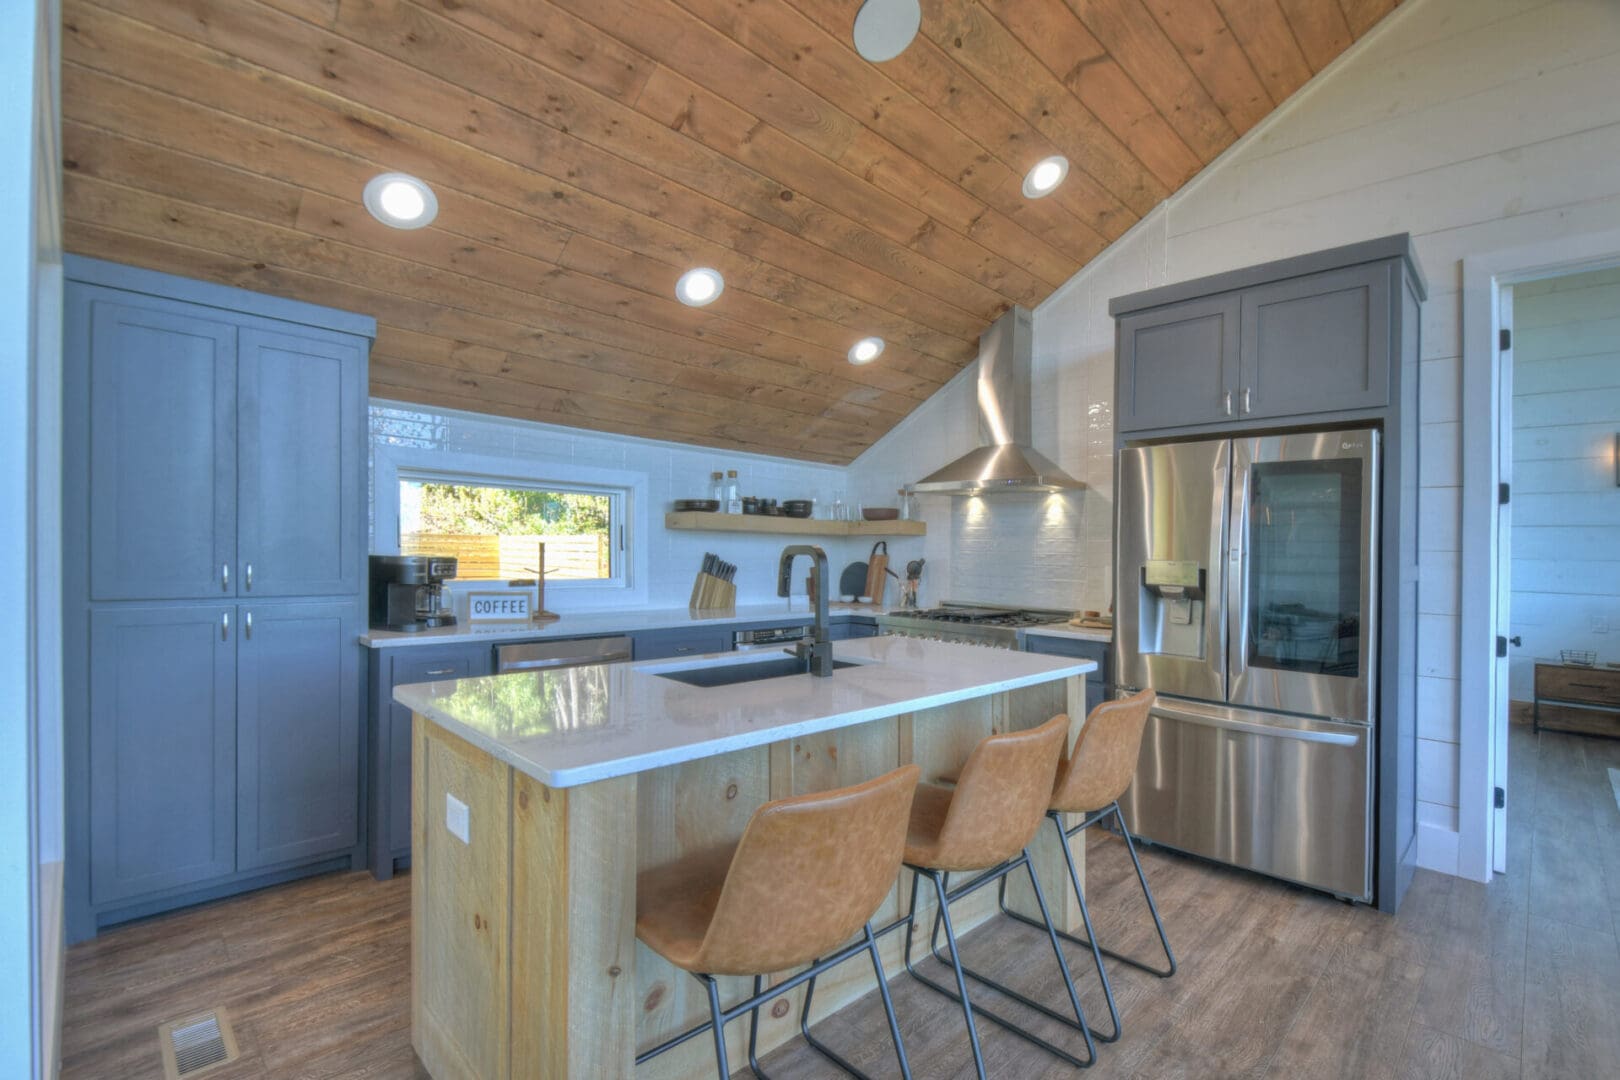 A kitchen in a tiny house with wood ceilings, designed by an architect specializing in architectural design services.